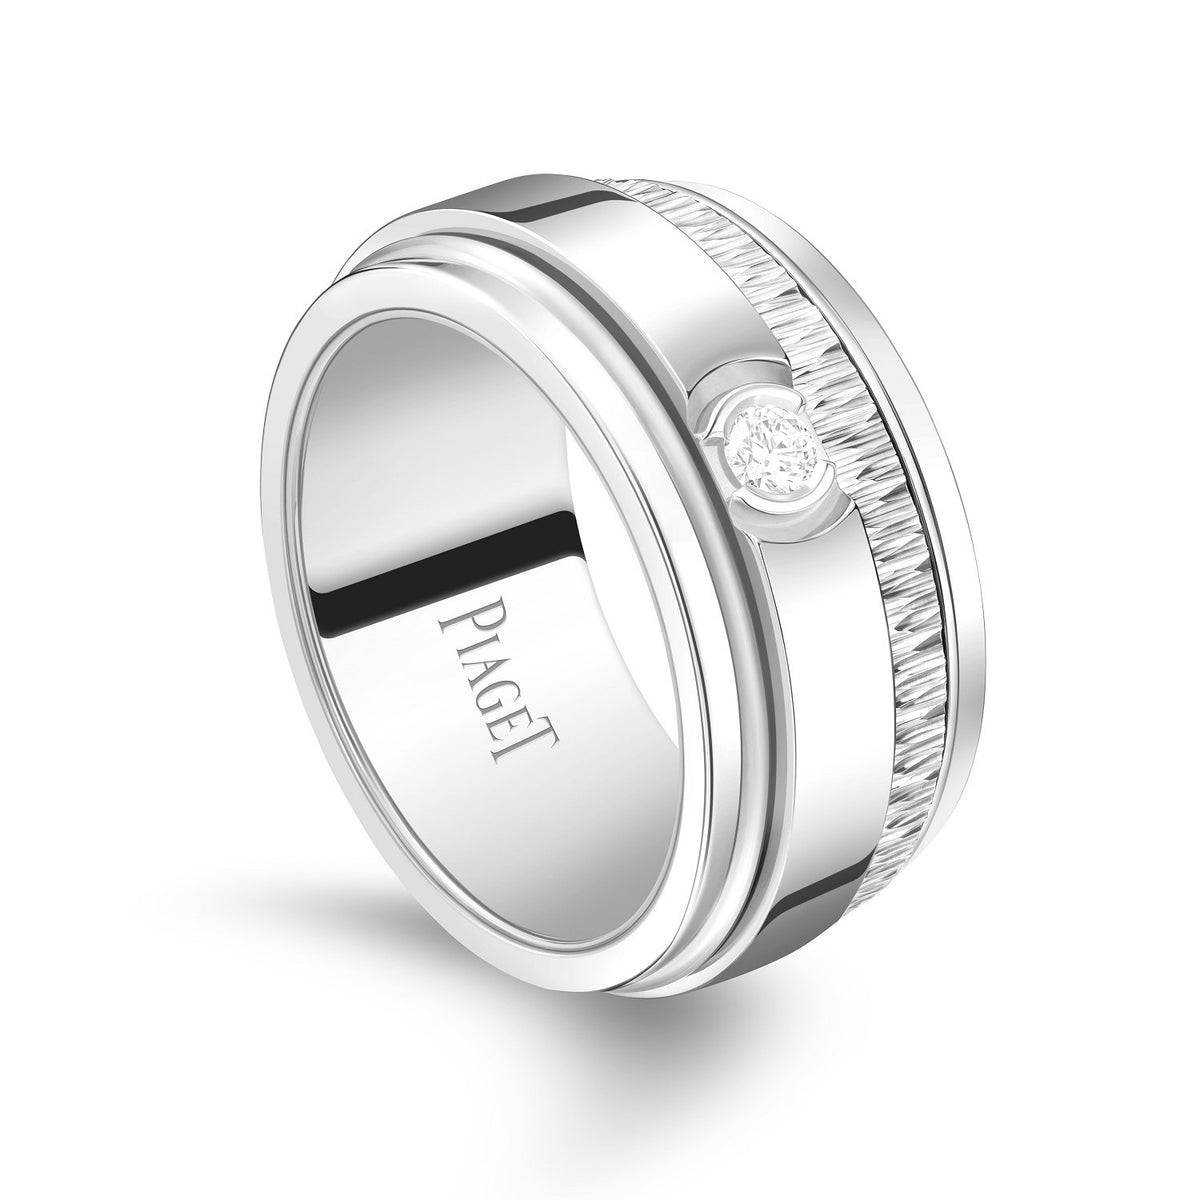 Possession Palace Décor Ring in White Gold